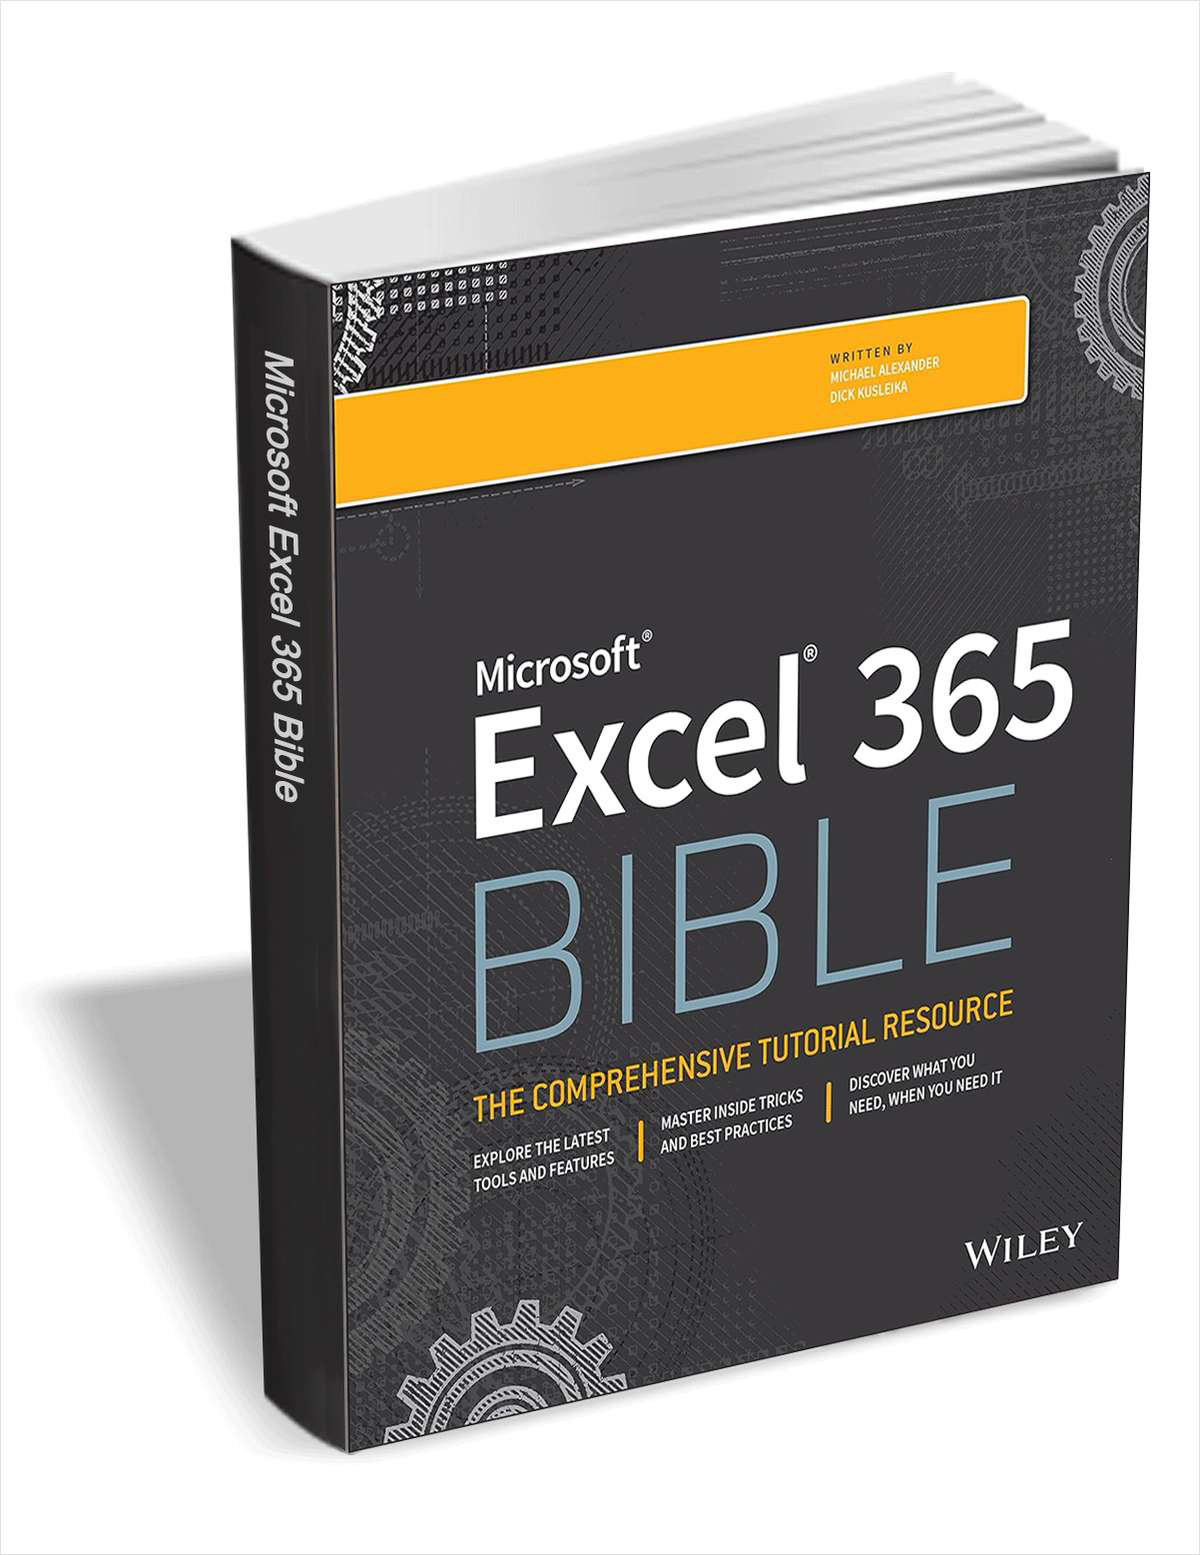 Microsoft Excel 365 Bible ($33.00 Value) FREE for a Limited Time Screenshot